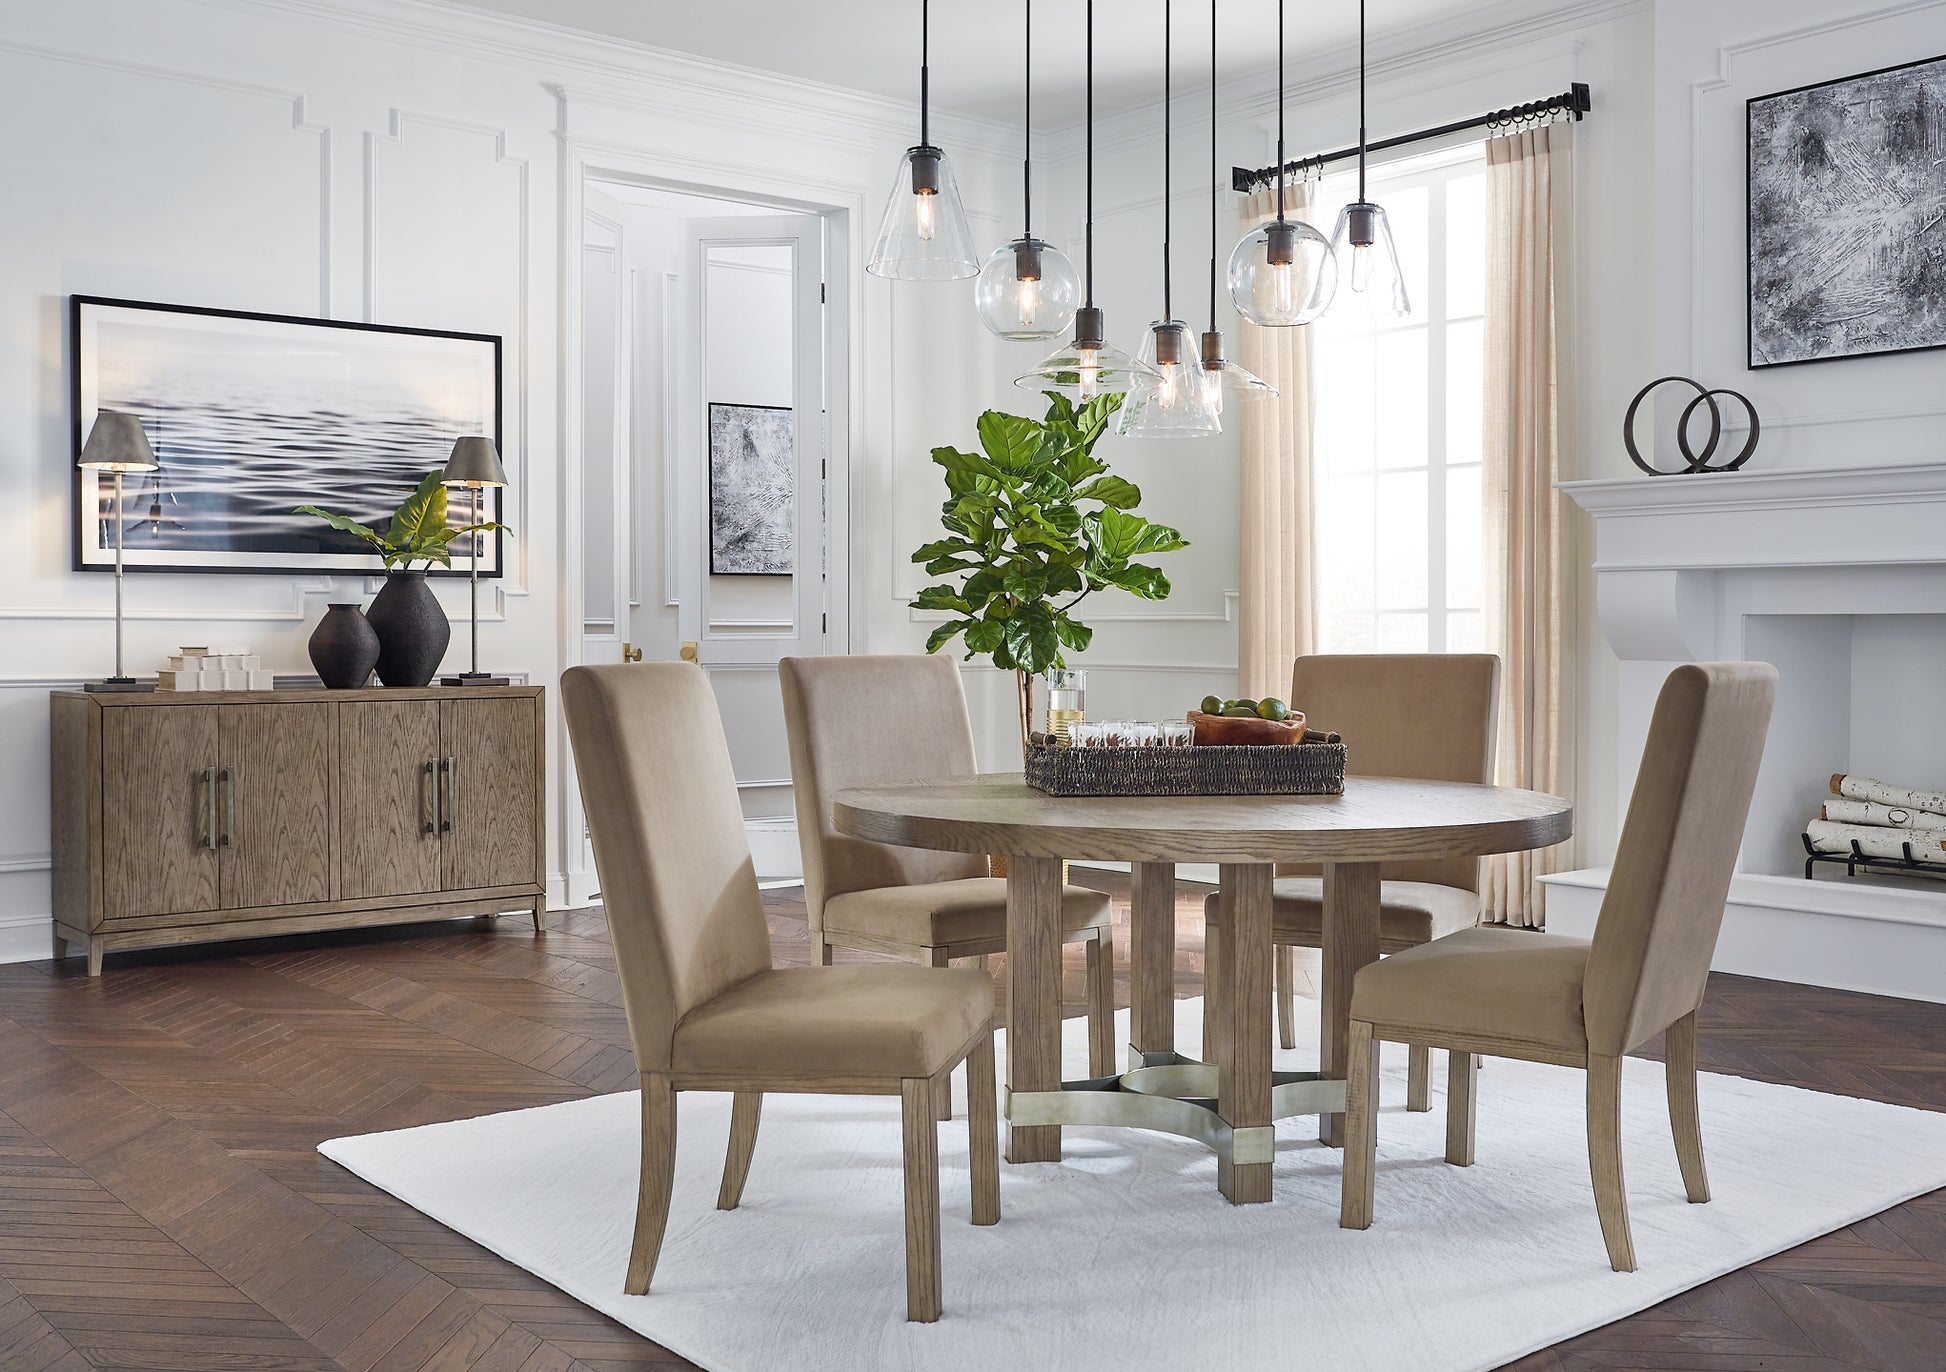 Chrestner Dining Table and 4 Chairs Wilson Furniture (OH)  in Bridgeport, Ohio. Serving Bridgeport, Yorkville, Bellaire, & Avondale